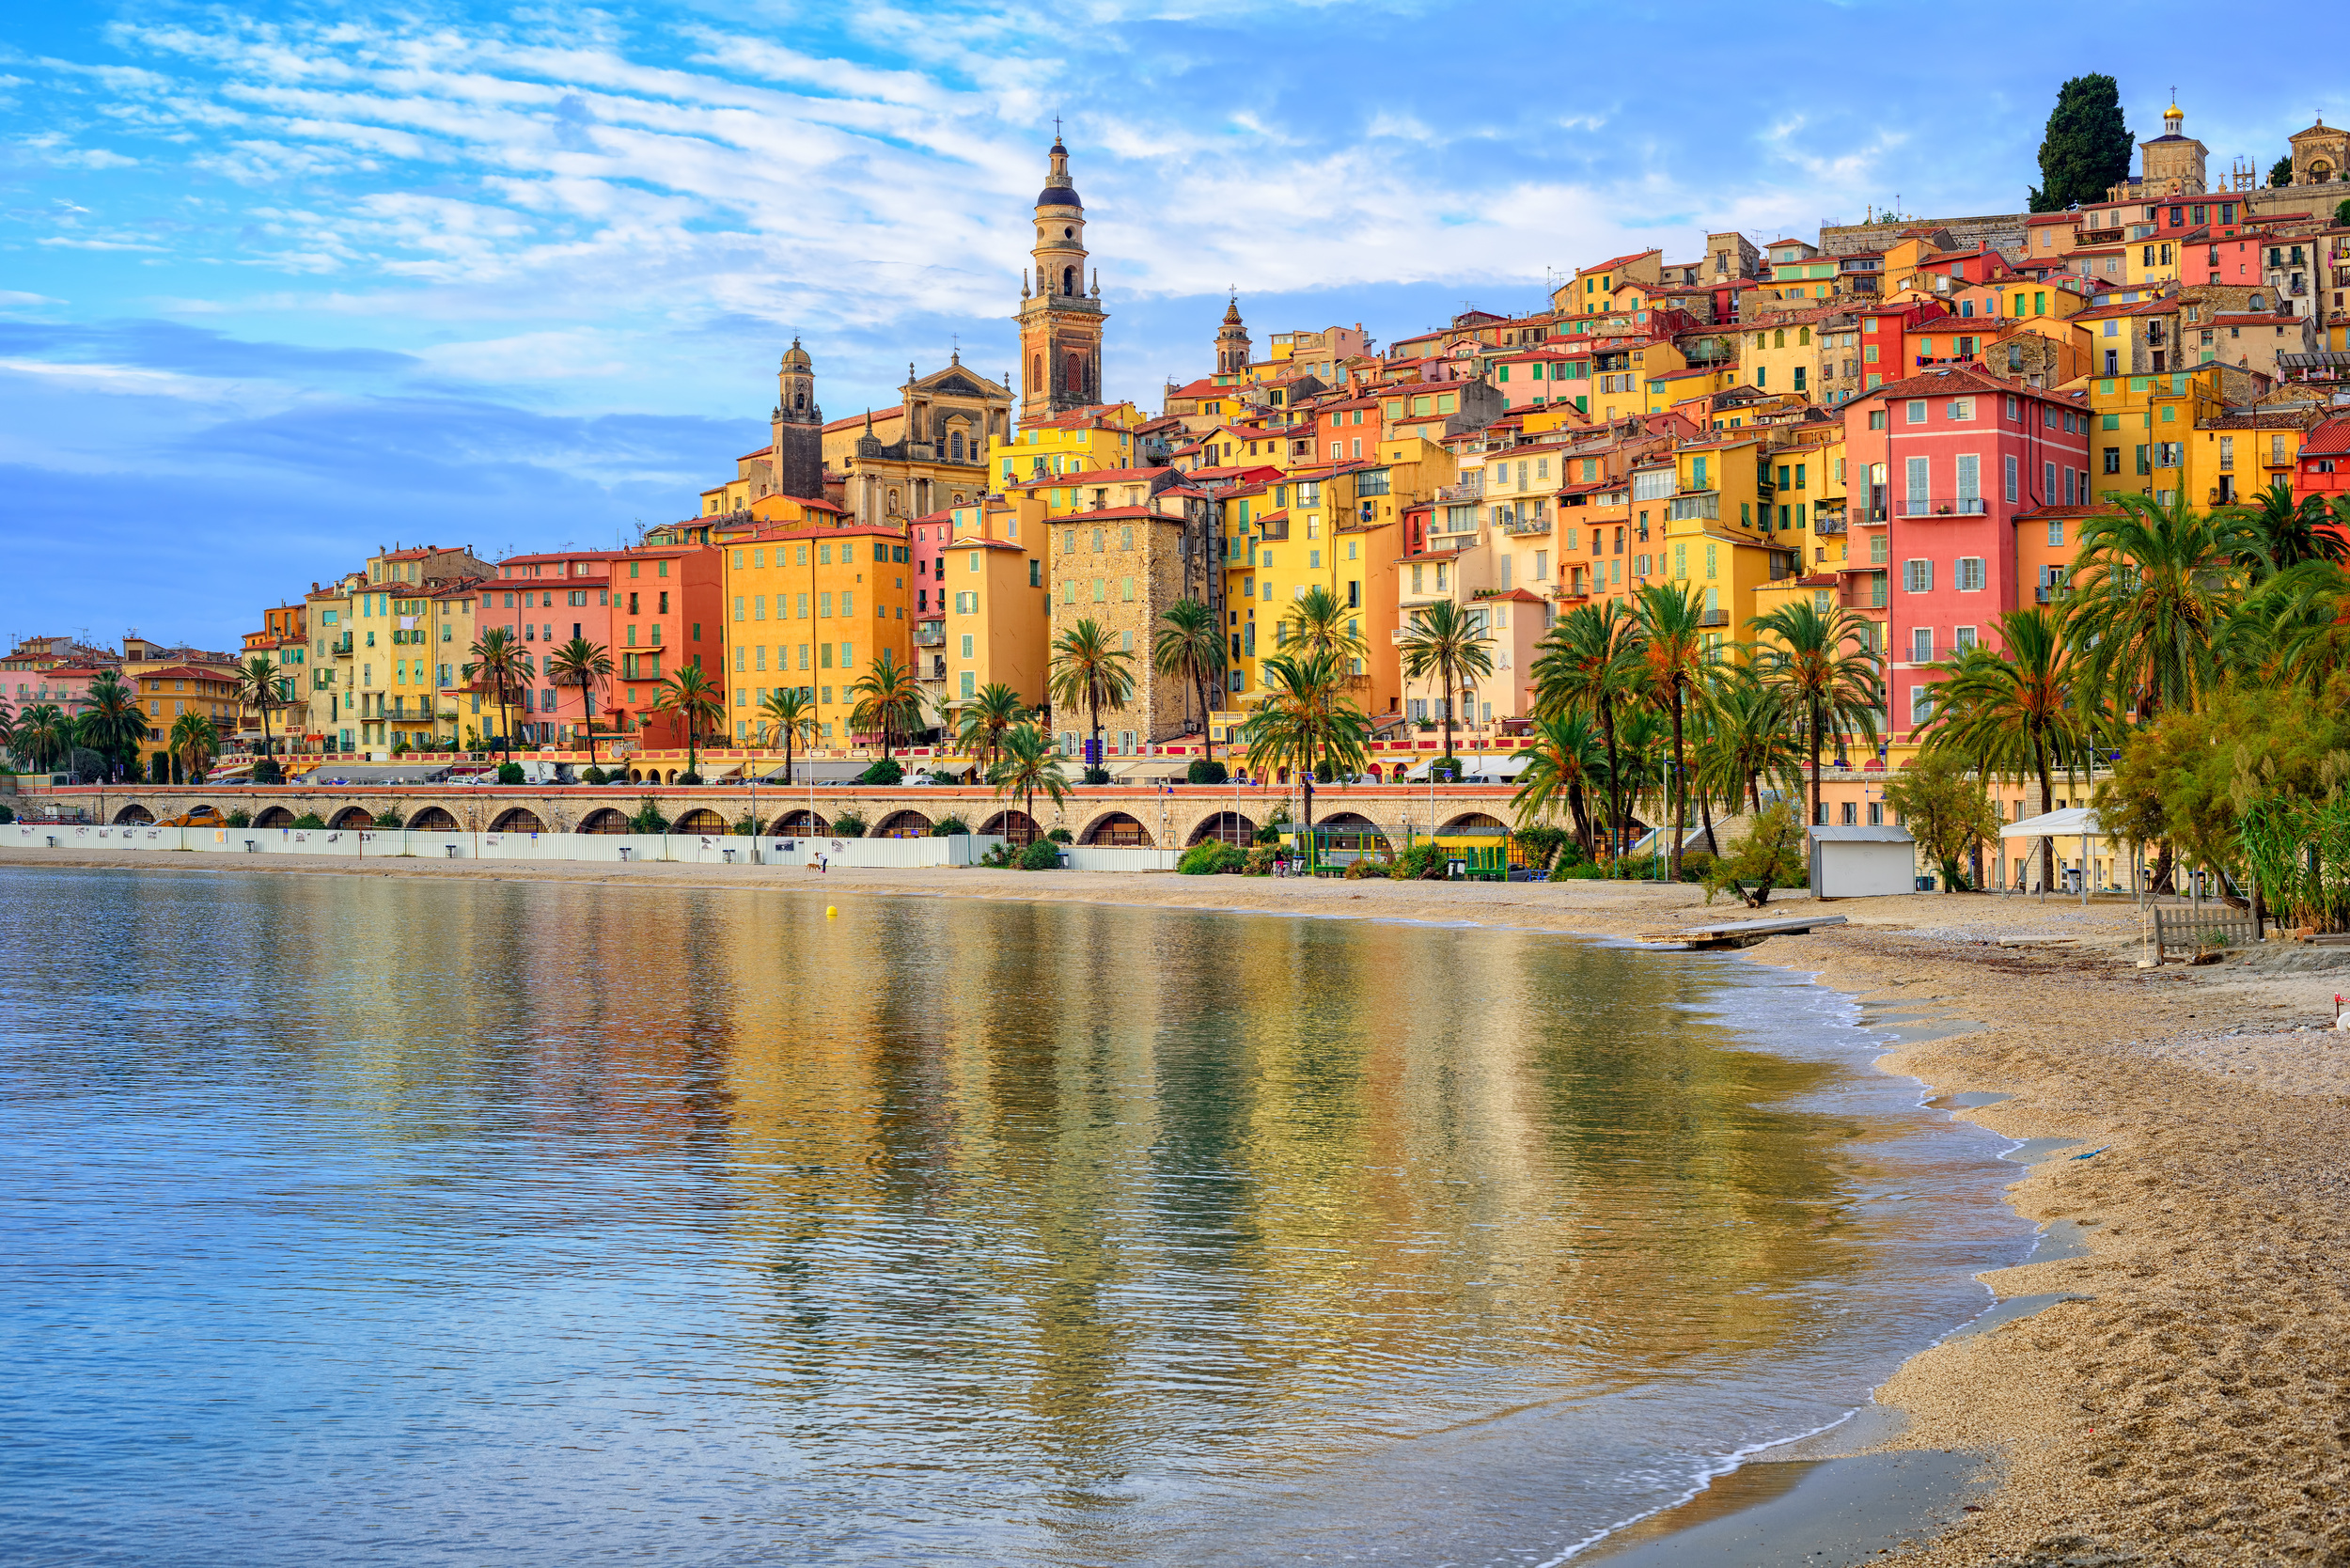 <p>The French Riviera is synonymous with vacations by the sea. And Nice, one of the area’s largest cities, is a great place to enjoy some sun. Take in the Mediterranean against a backdrop of candy-colored buildings in Art Deco and Baroque style.</p><p>You may also like: <a href='https://www.yardbarker.com/lifestyle/articles/the_22_best_christmas_markets_in_europe/s1__39607735'>The 22 best Christmas markets in Europe</a></p>